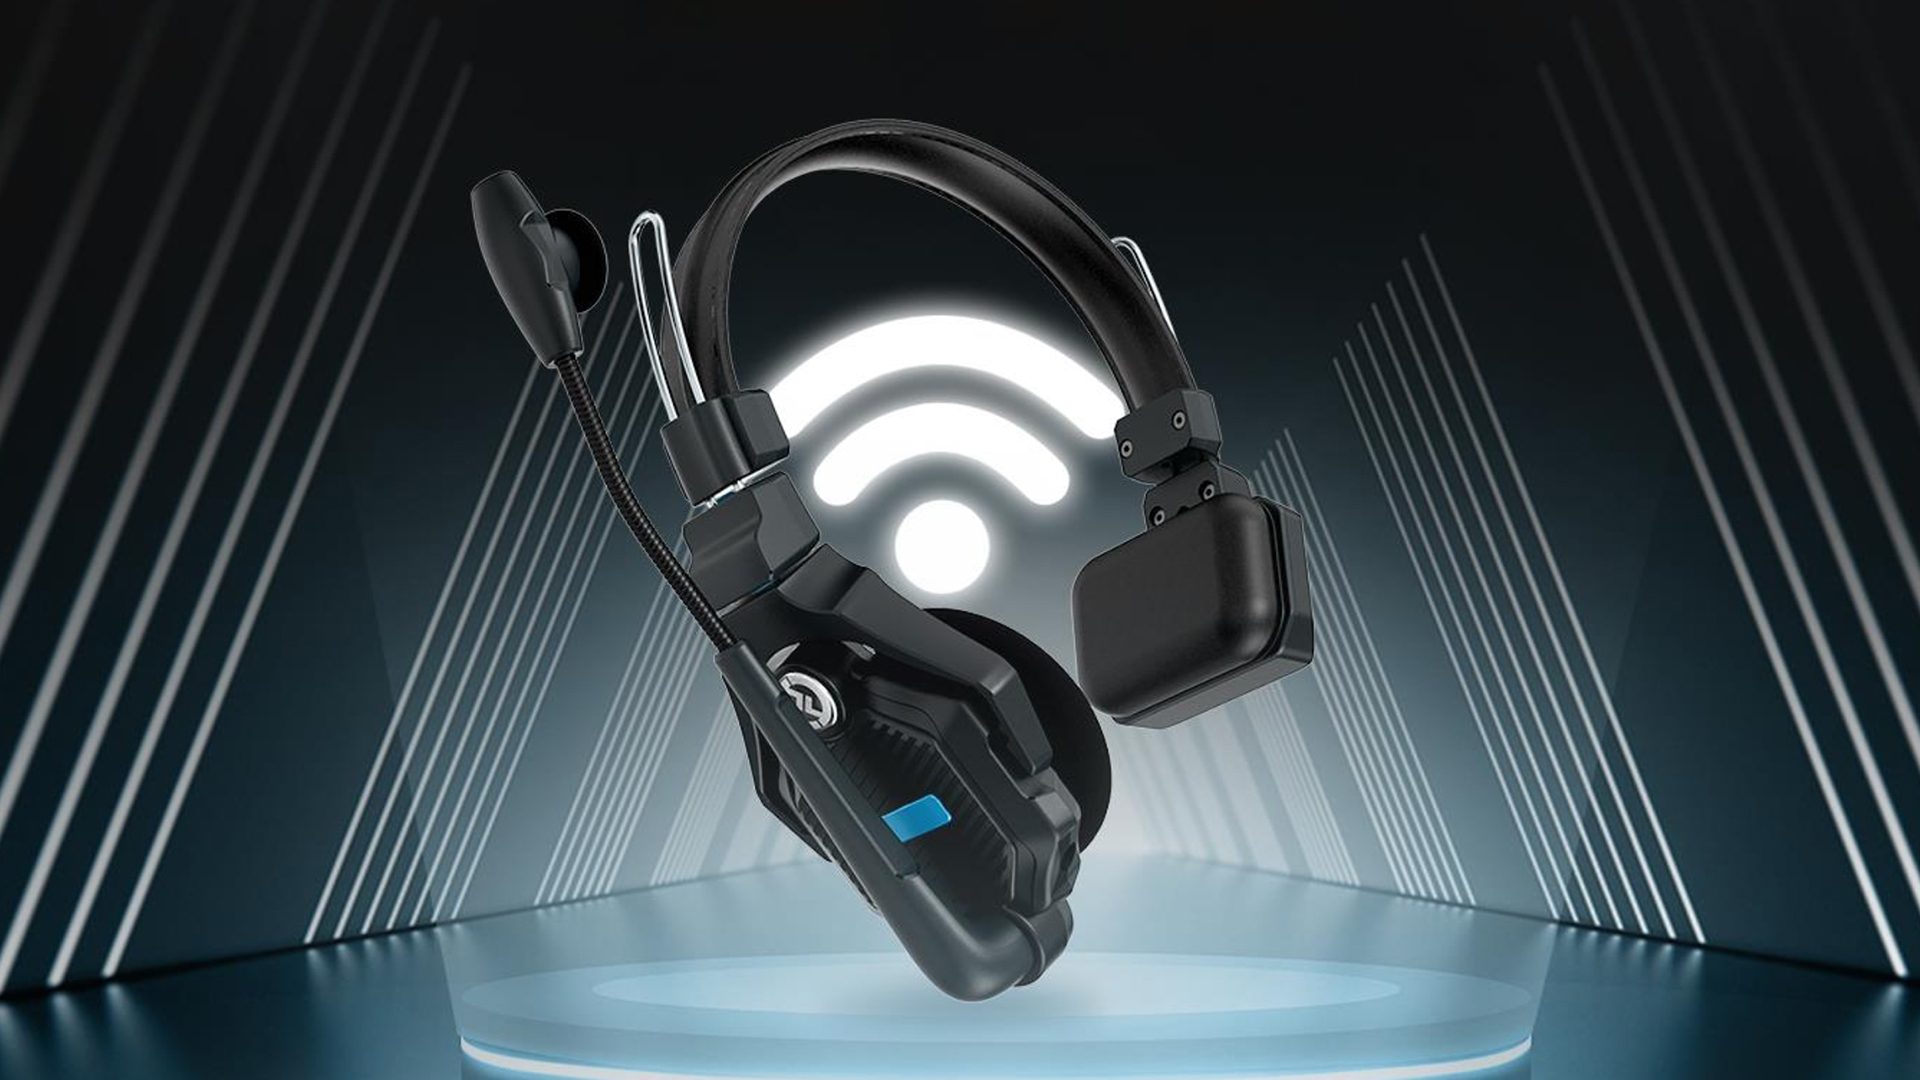 Photo of Hollyland Solidcom C1 Intercom Headset System Released – Up to 1,000ft Hands-free